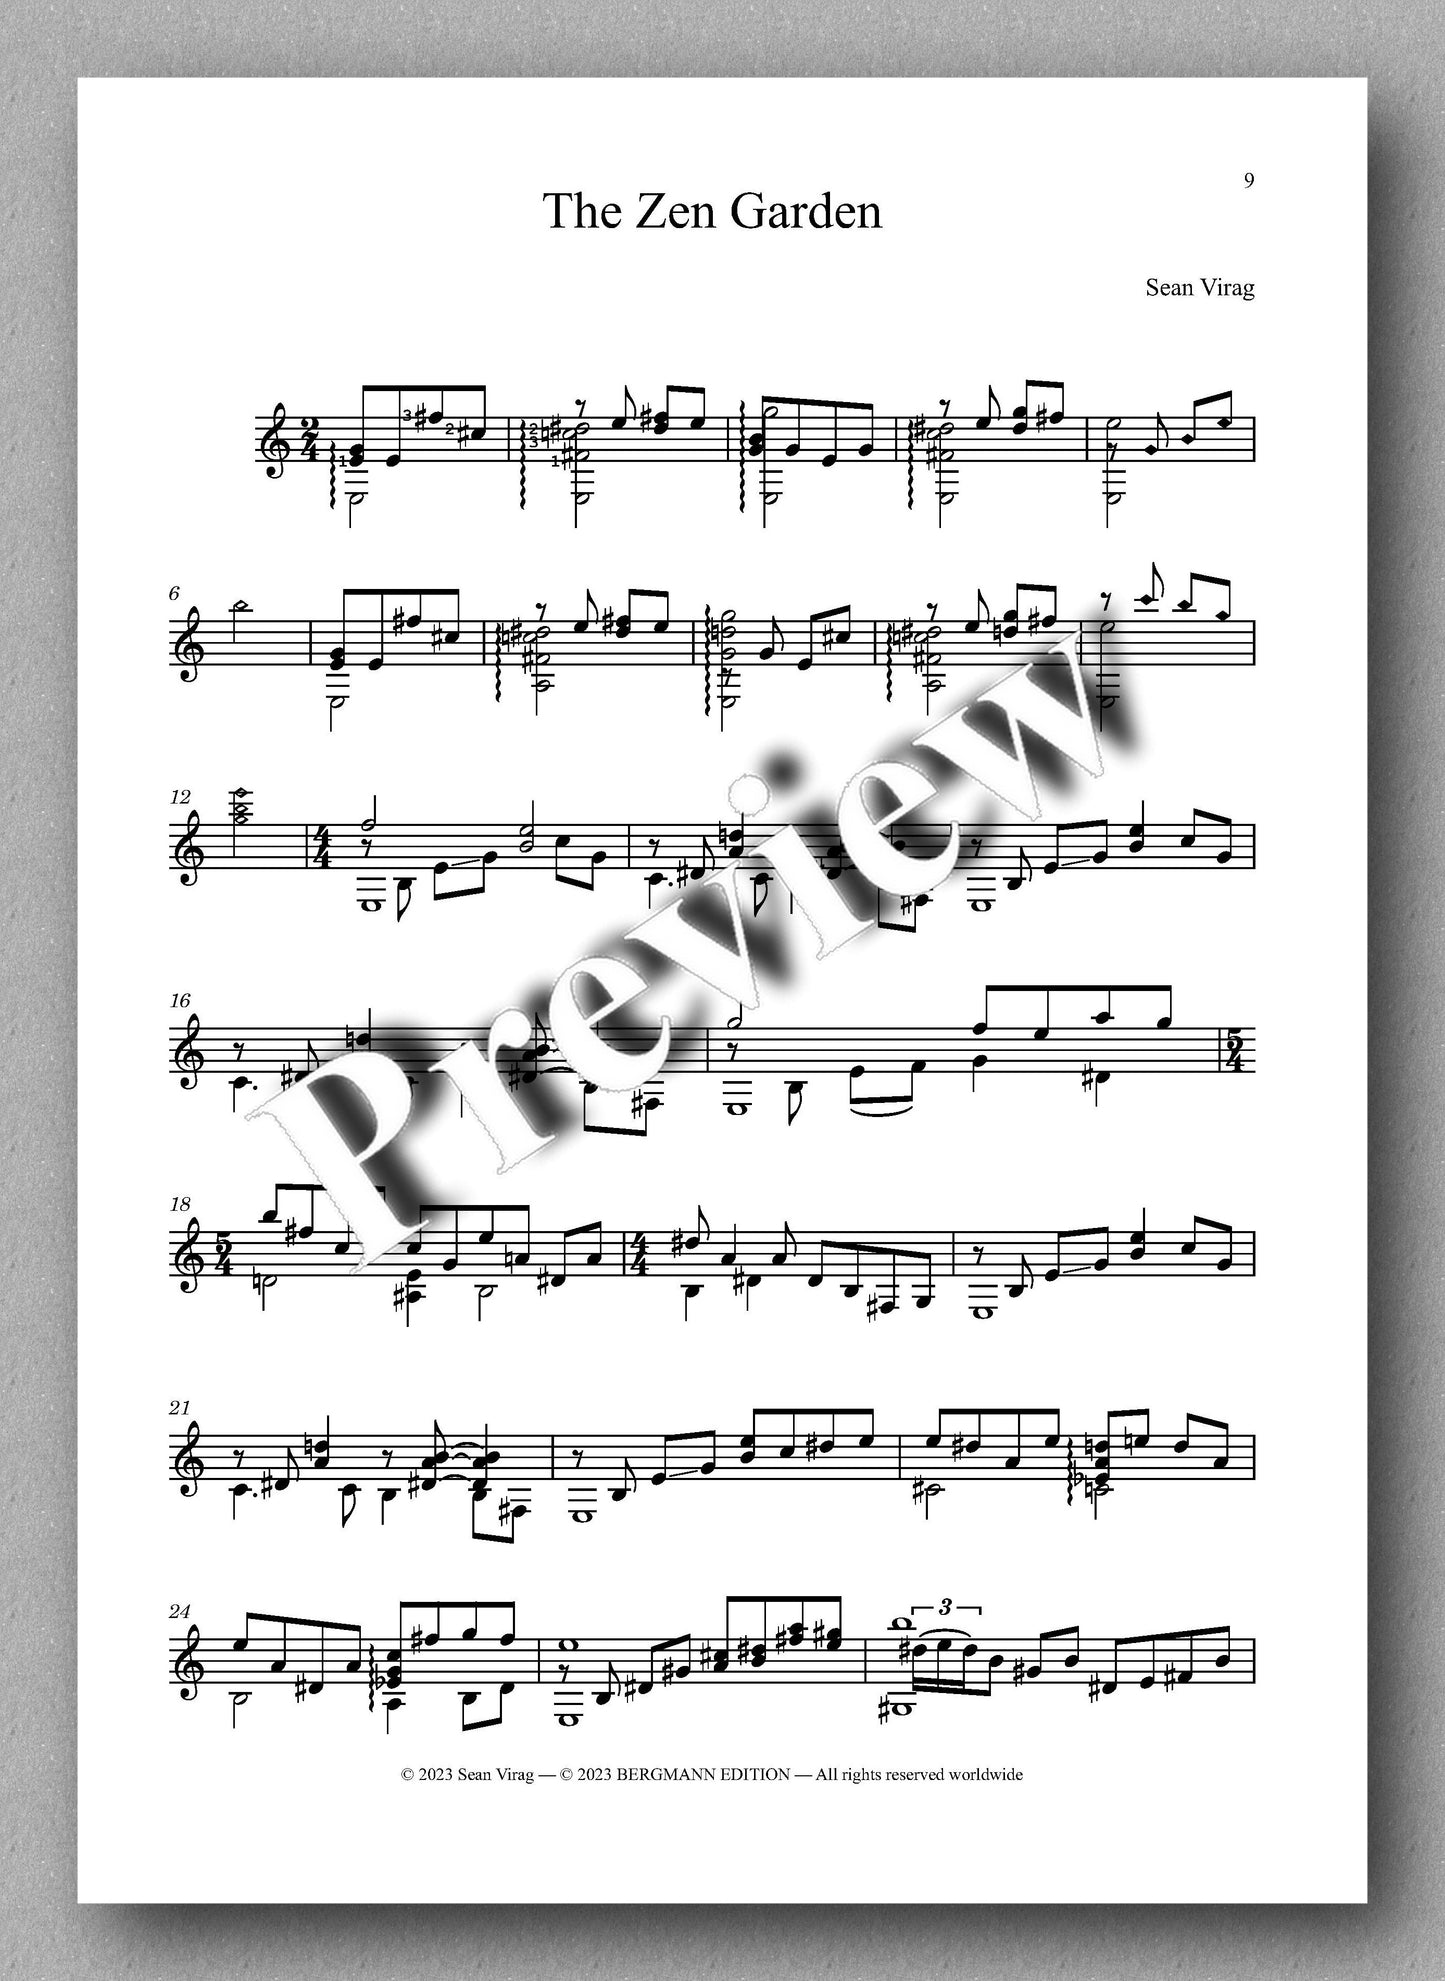 Sean Virag, Ten Pieces for Classical Guitar - preview of the music score 2